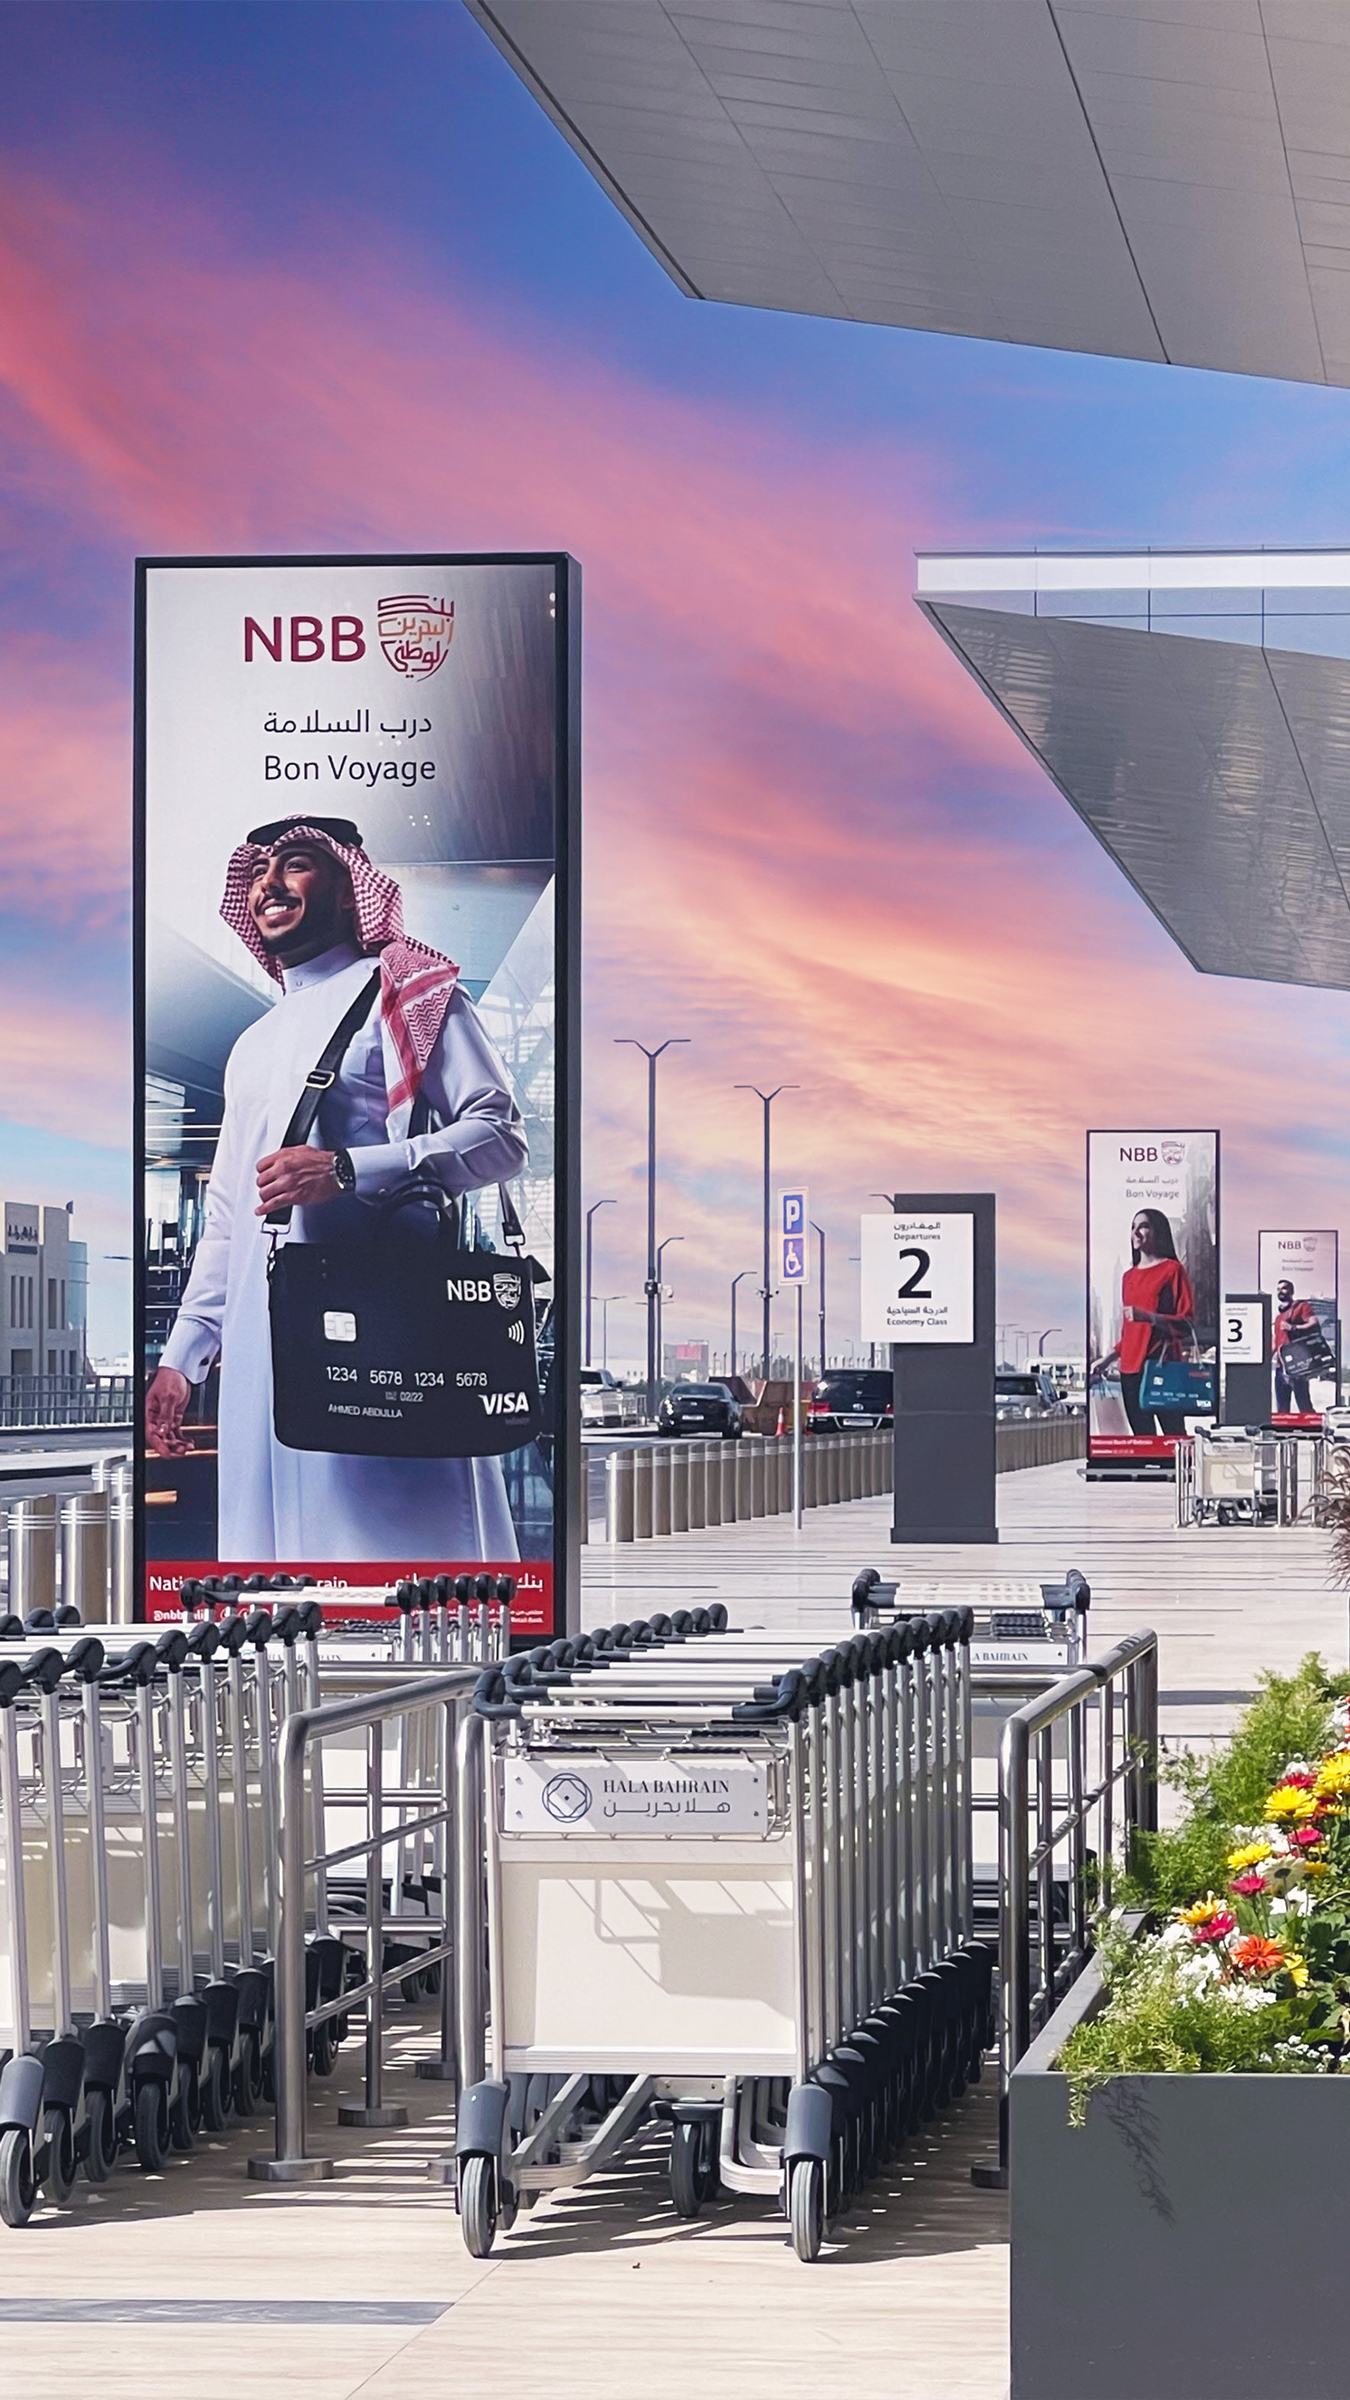 NBB Airport Departure Ads